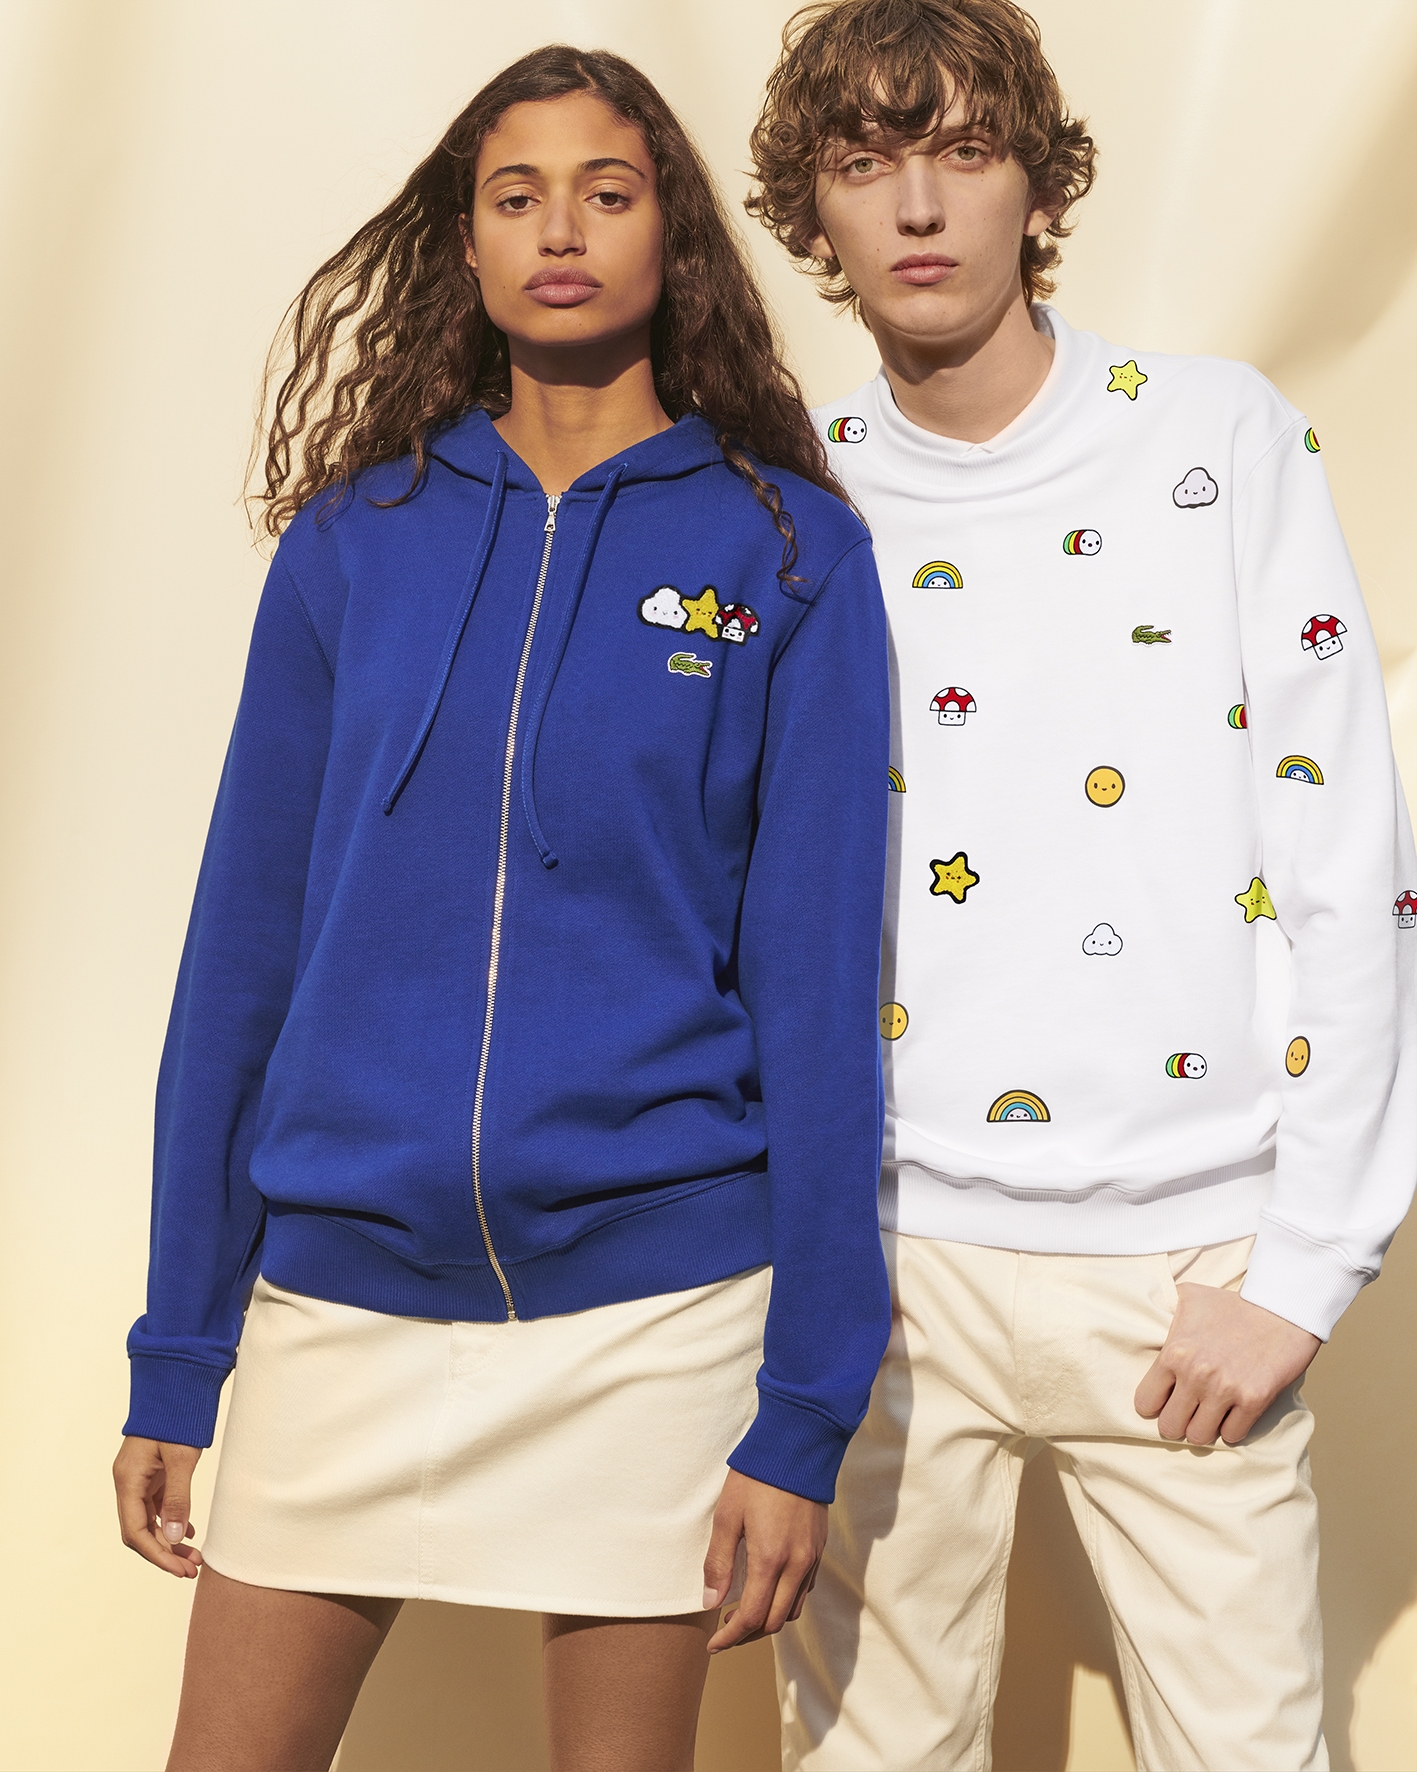 lacoste-x-friendswithyou